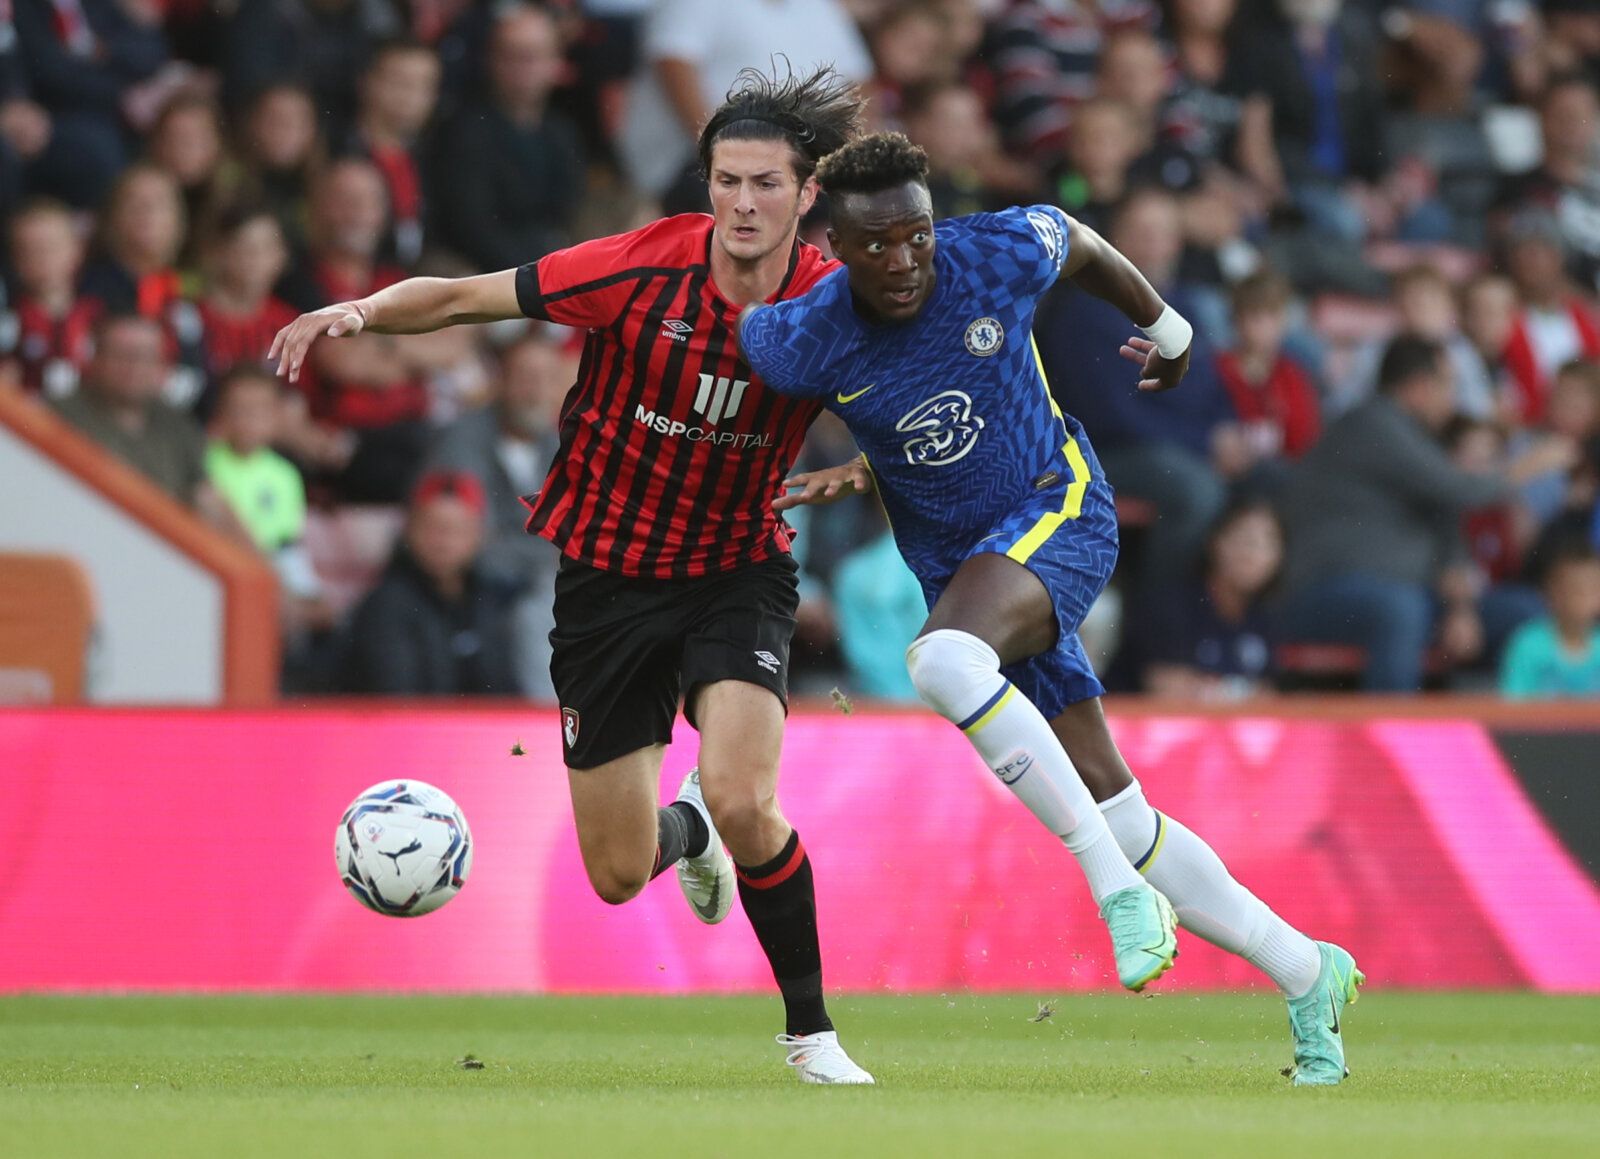 Soccer Football - Pre Season Friendly - AFC Bournemouth v Chelsea - Vitality Stadium, Bournemouth, Britain - July 27, 2021 Chelsea's Tammy Abraham in action with Bournemouth's Zeno Ibsen Rossi Action Images via Reuters/Peter Cziborra